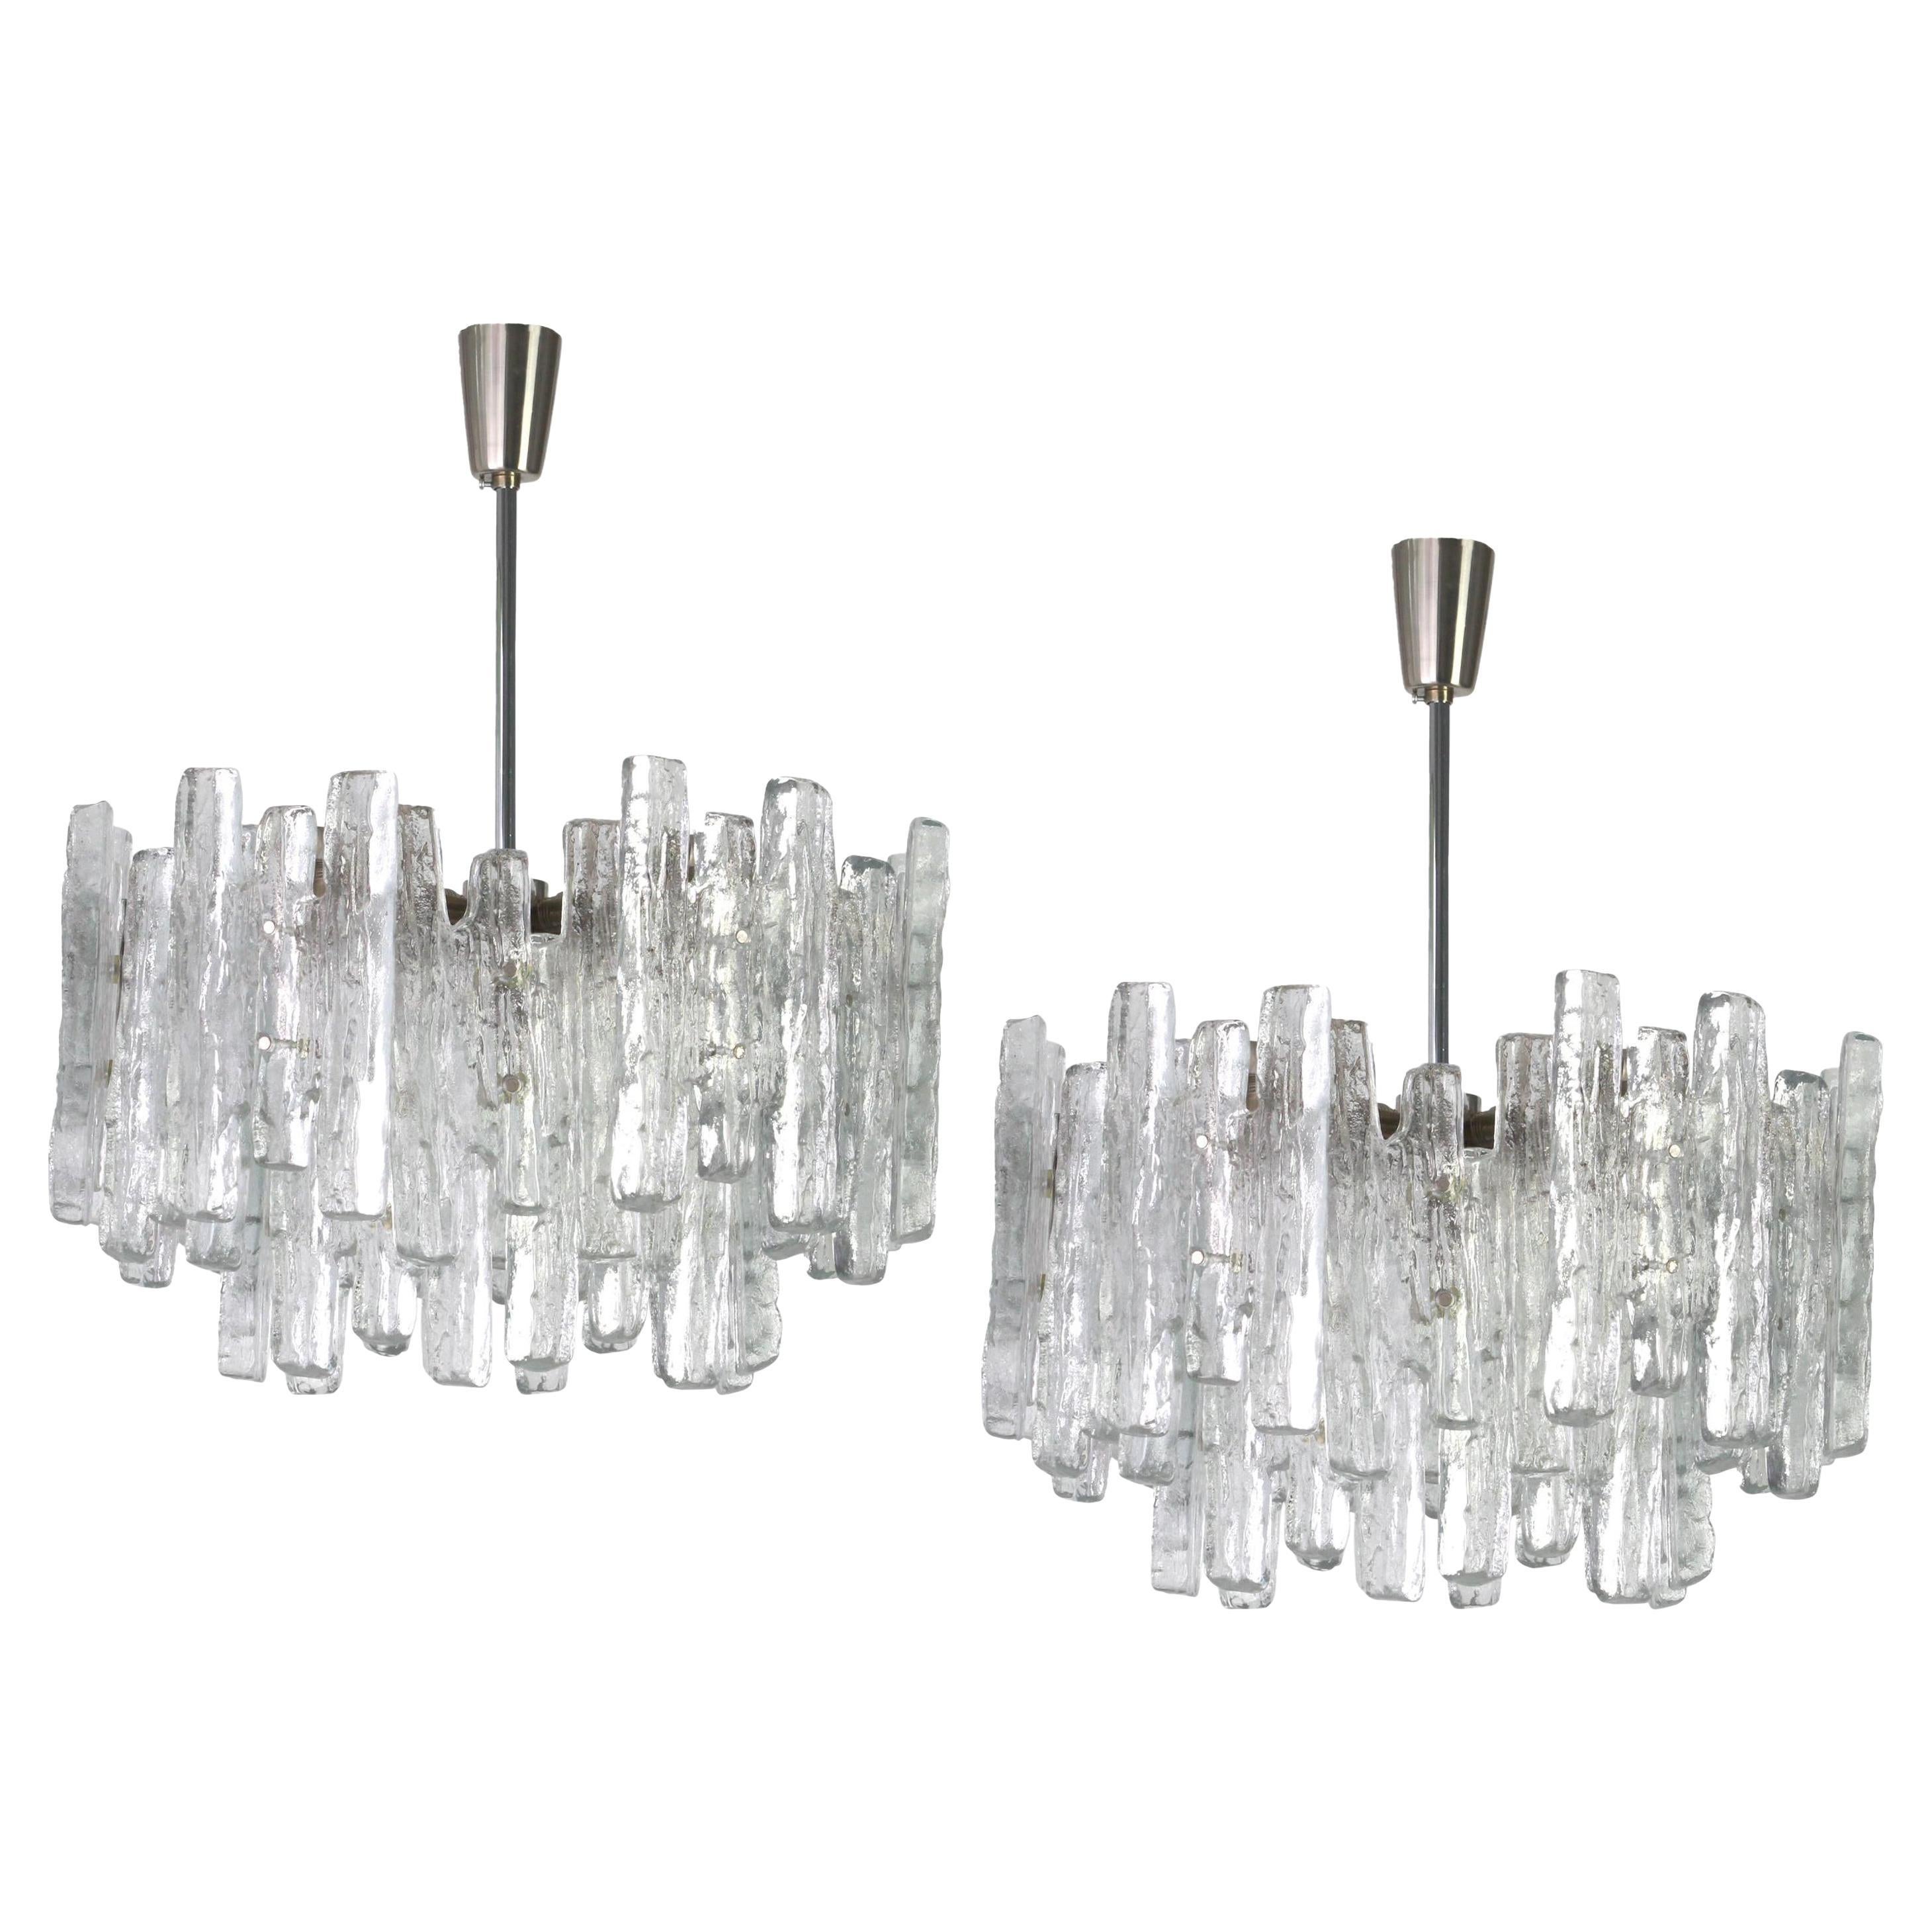 1 of 2 Large Rare Murano Ice Glass Chandelier by Kalmar, Austria, 1960s For Sale